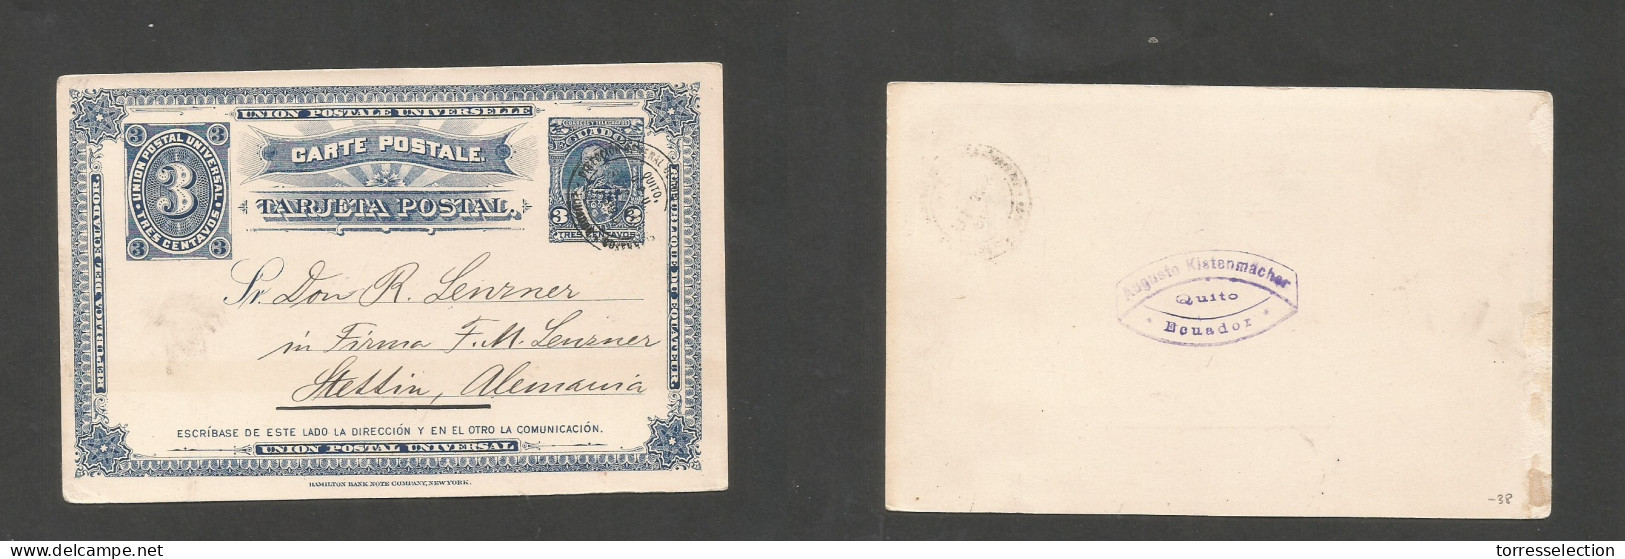 ECUADOR. C. 1896. Quito - Germany, Stettin. 3c Blue Illustrated Stat Card, Cancelled Cds. VF, Scarce Usage. SALE. - Equateur